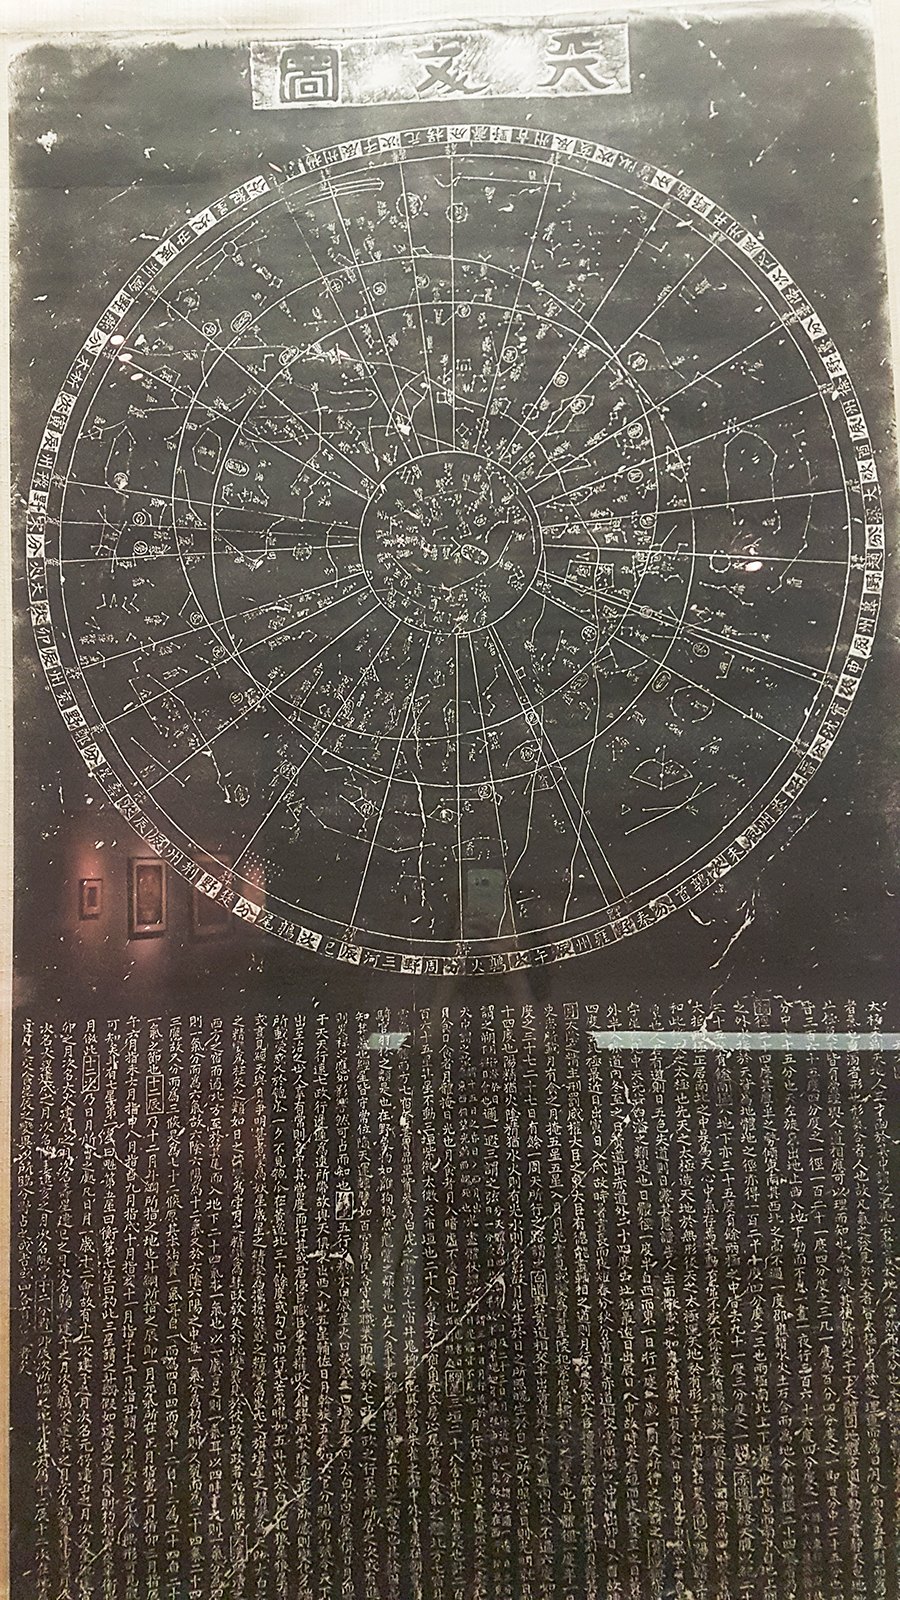 Chunyou Star Chart by Wang Zhiyuan, Ink impression of a stone-engraved carving in 1247 at the The Universe and Art: An Artistic Voyage Through Space exhibition, ArtScience Museum Singapore.